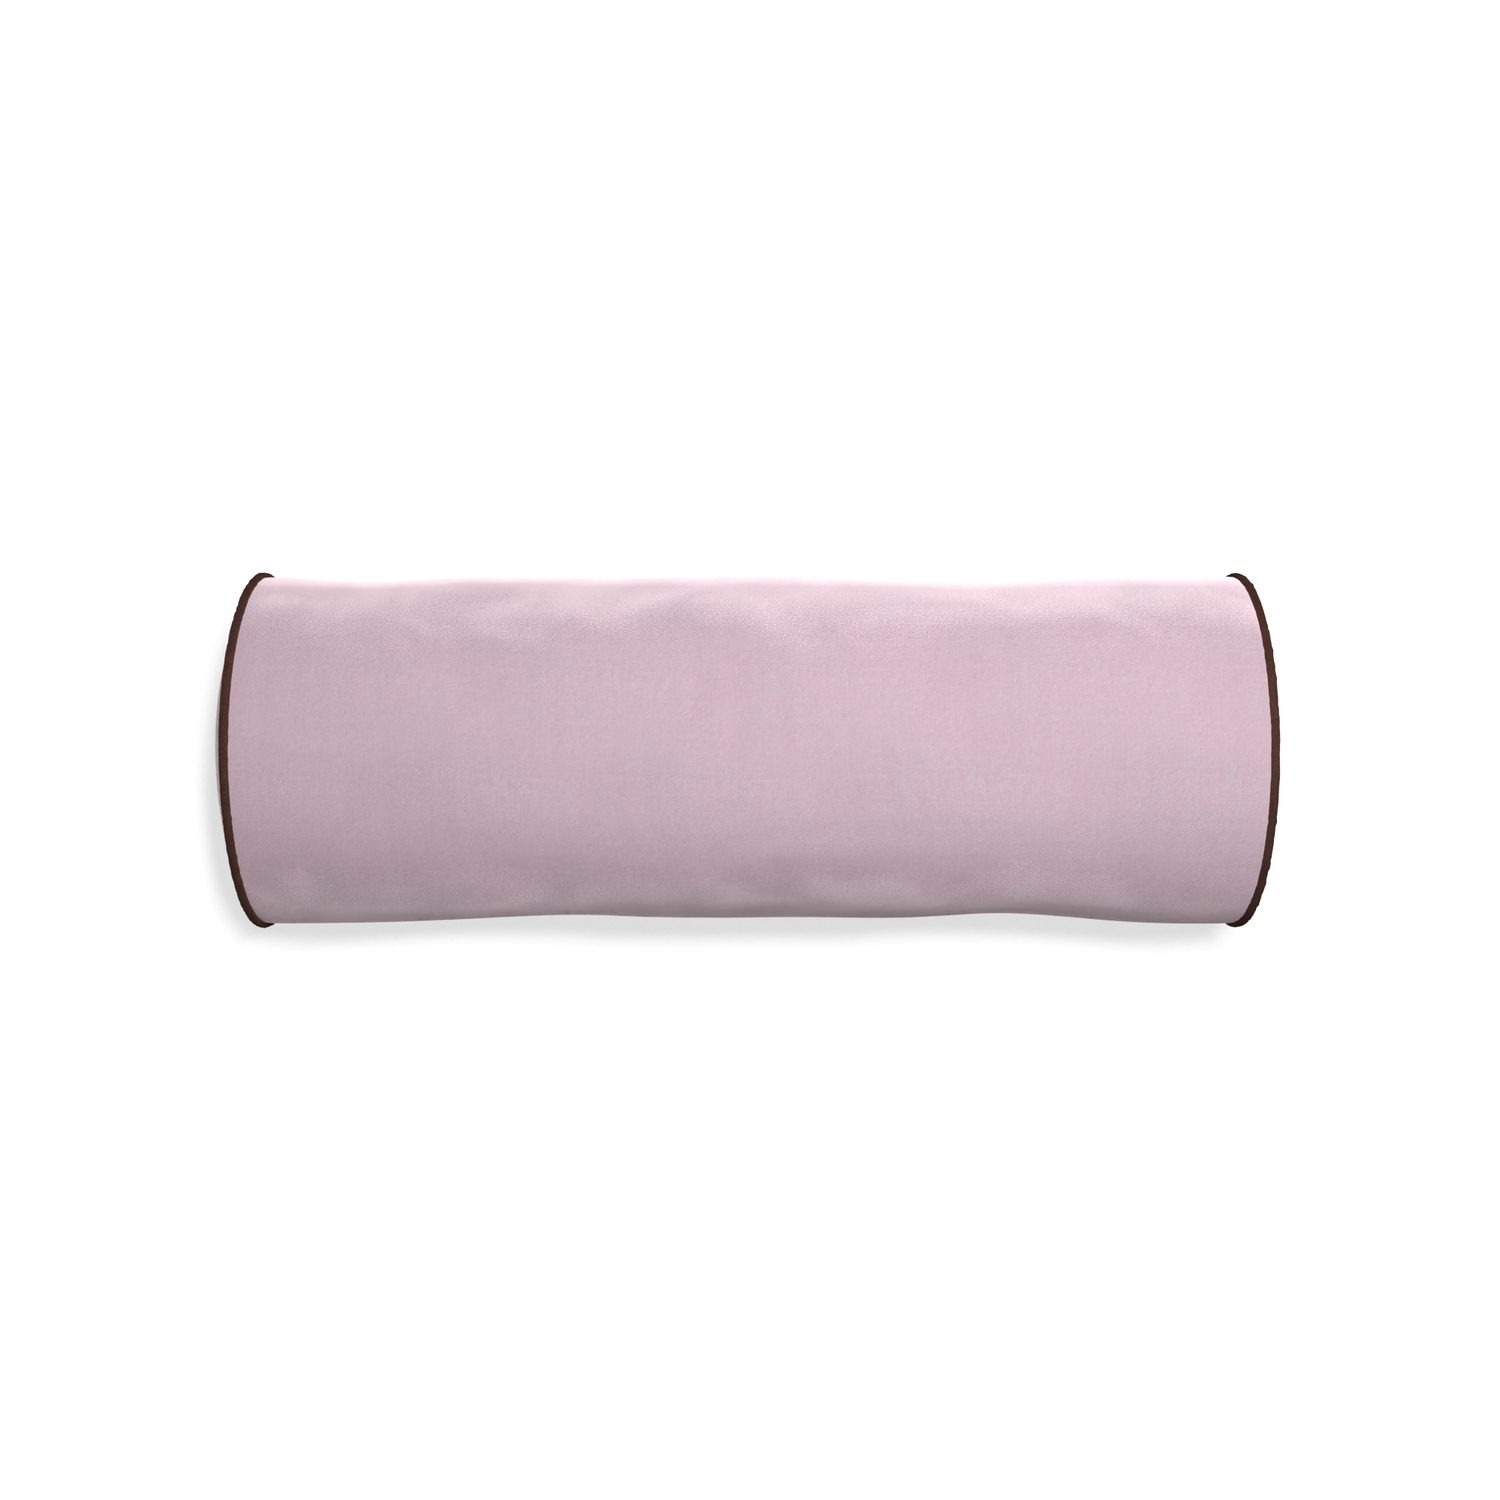 Bolster lilac velvet custom pillow with w piping on white background